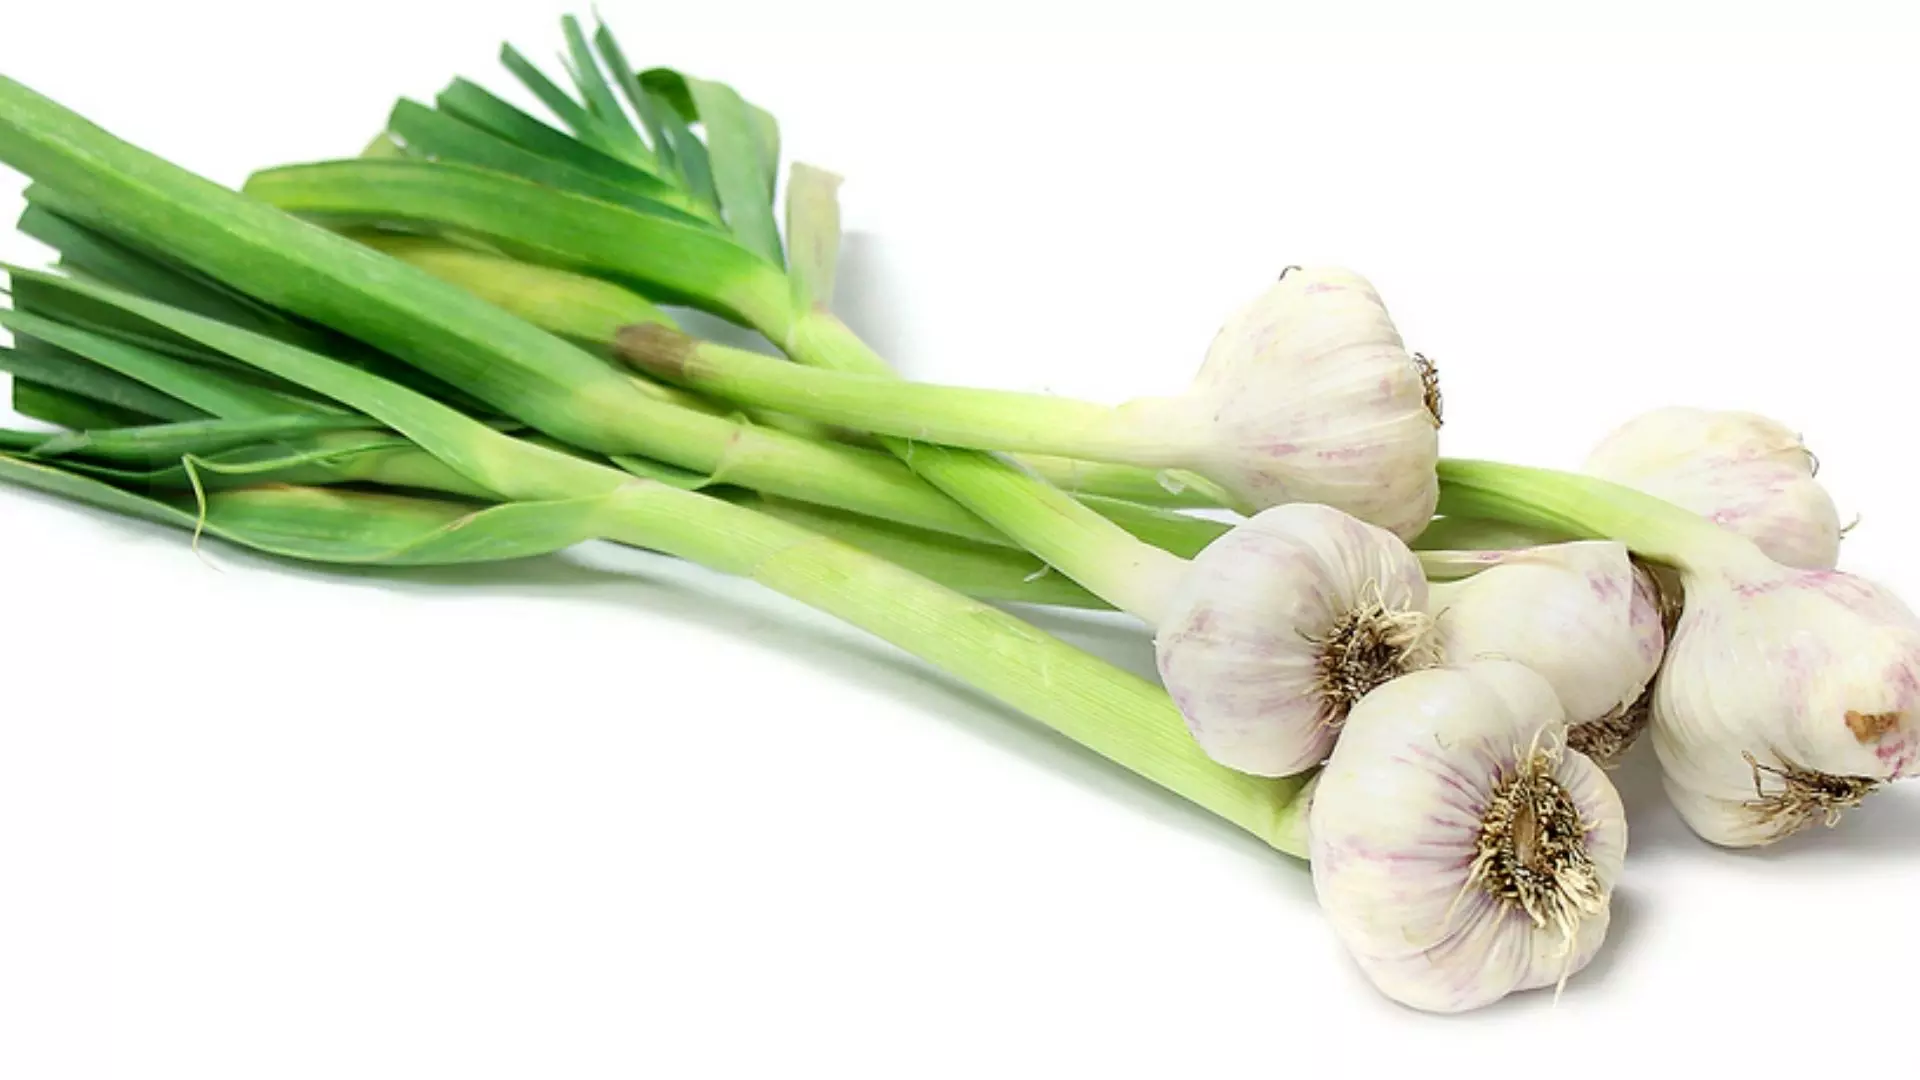 The Amazing Medicinal Properties of Green Garlic are Unique to These Recipes